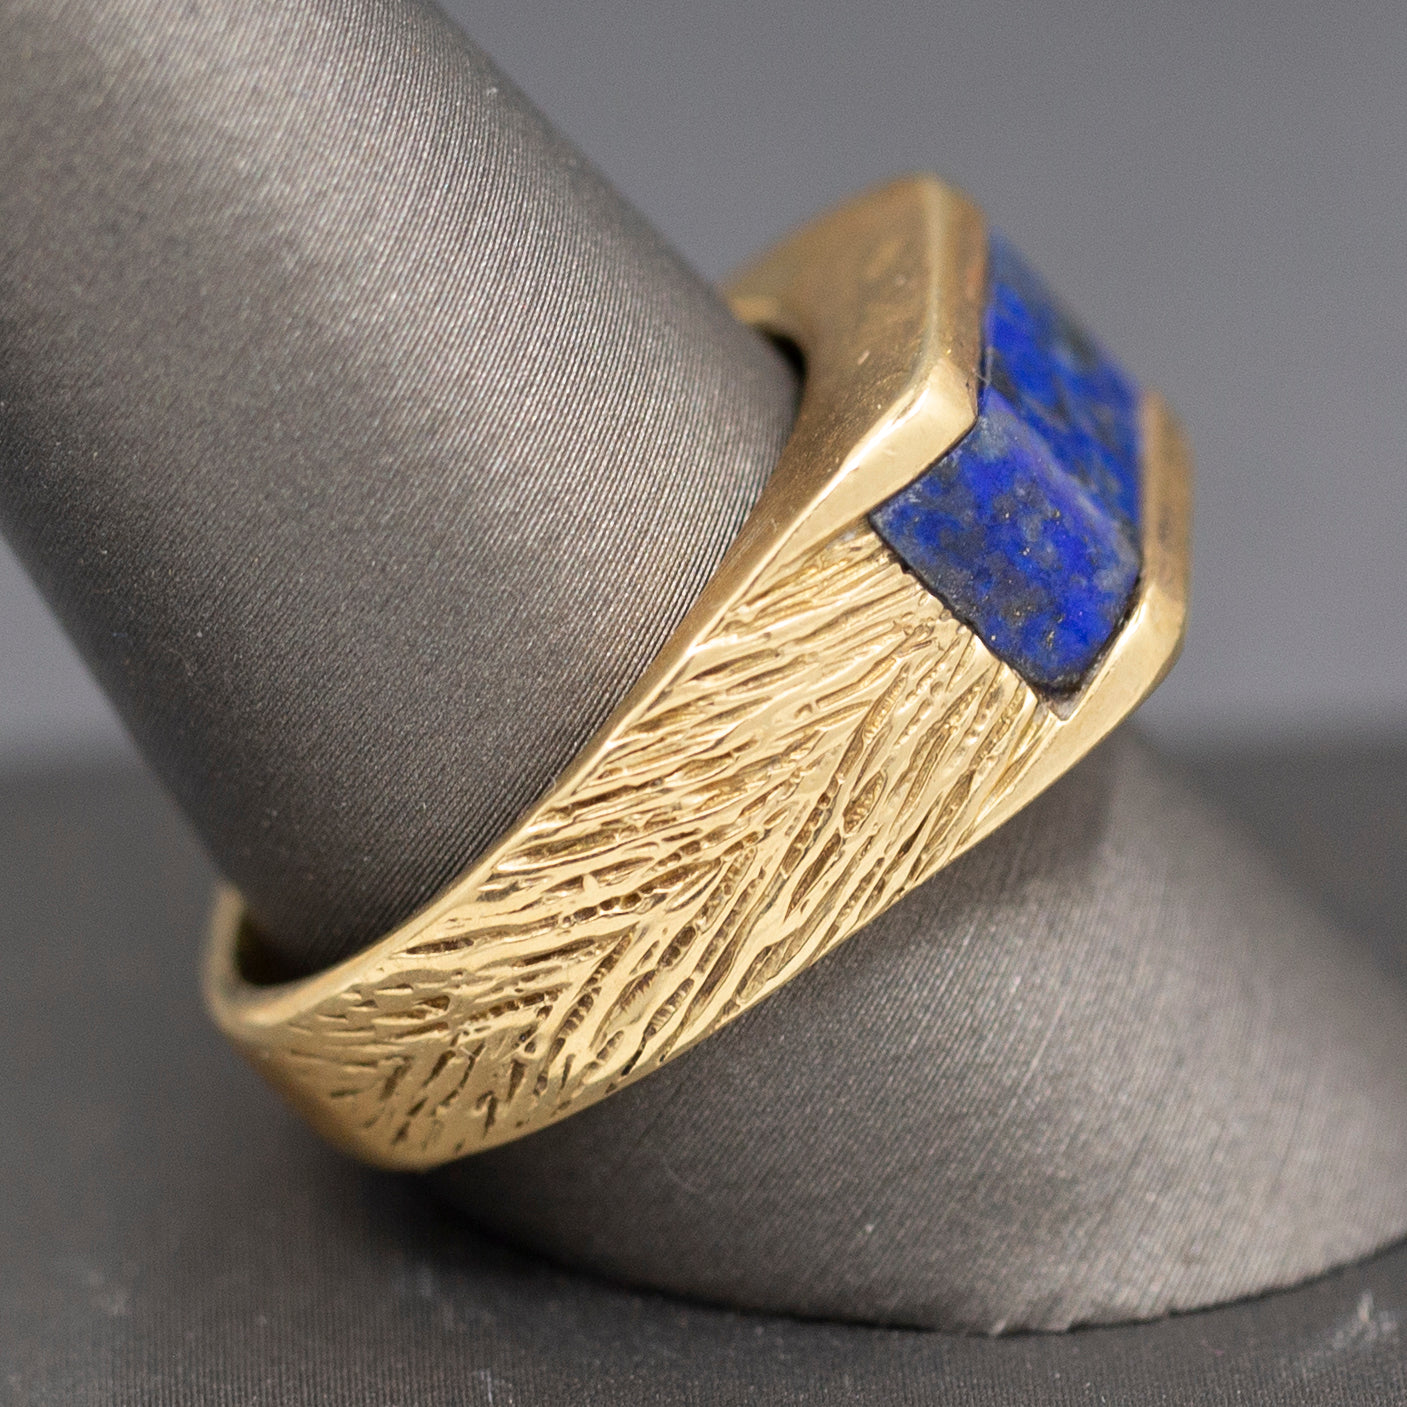 Men's Lapis Inlay Textured Signet Style Band Ring in 14k Yellow Gold